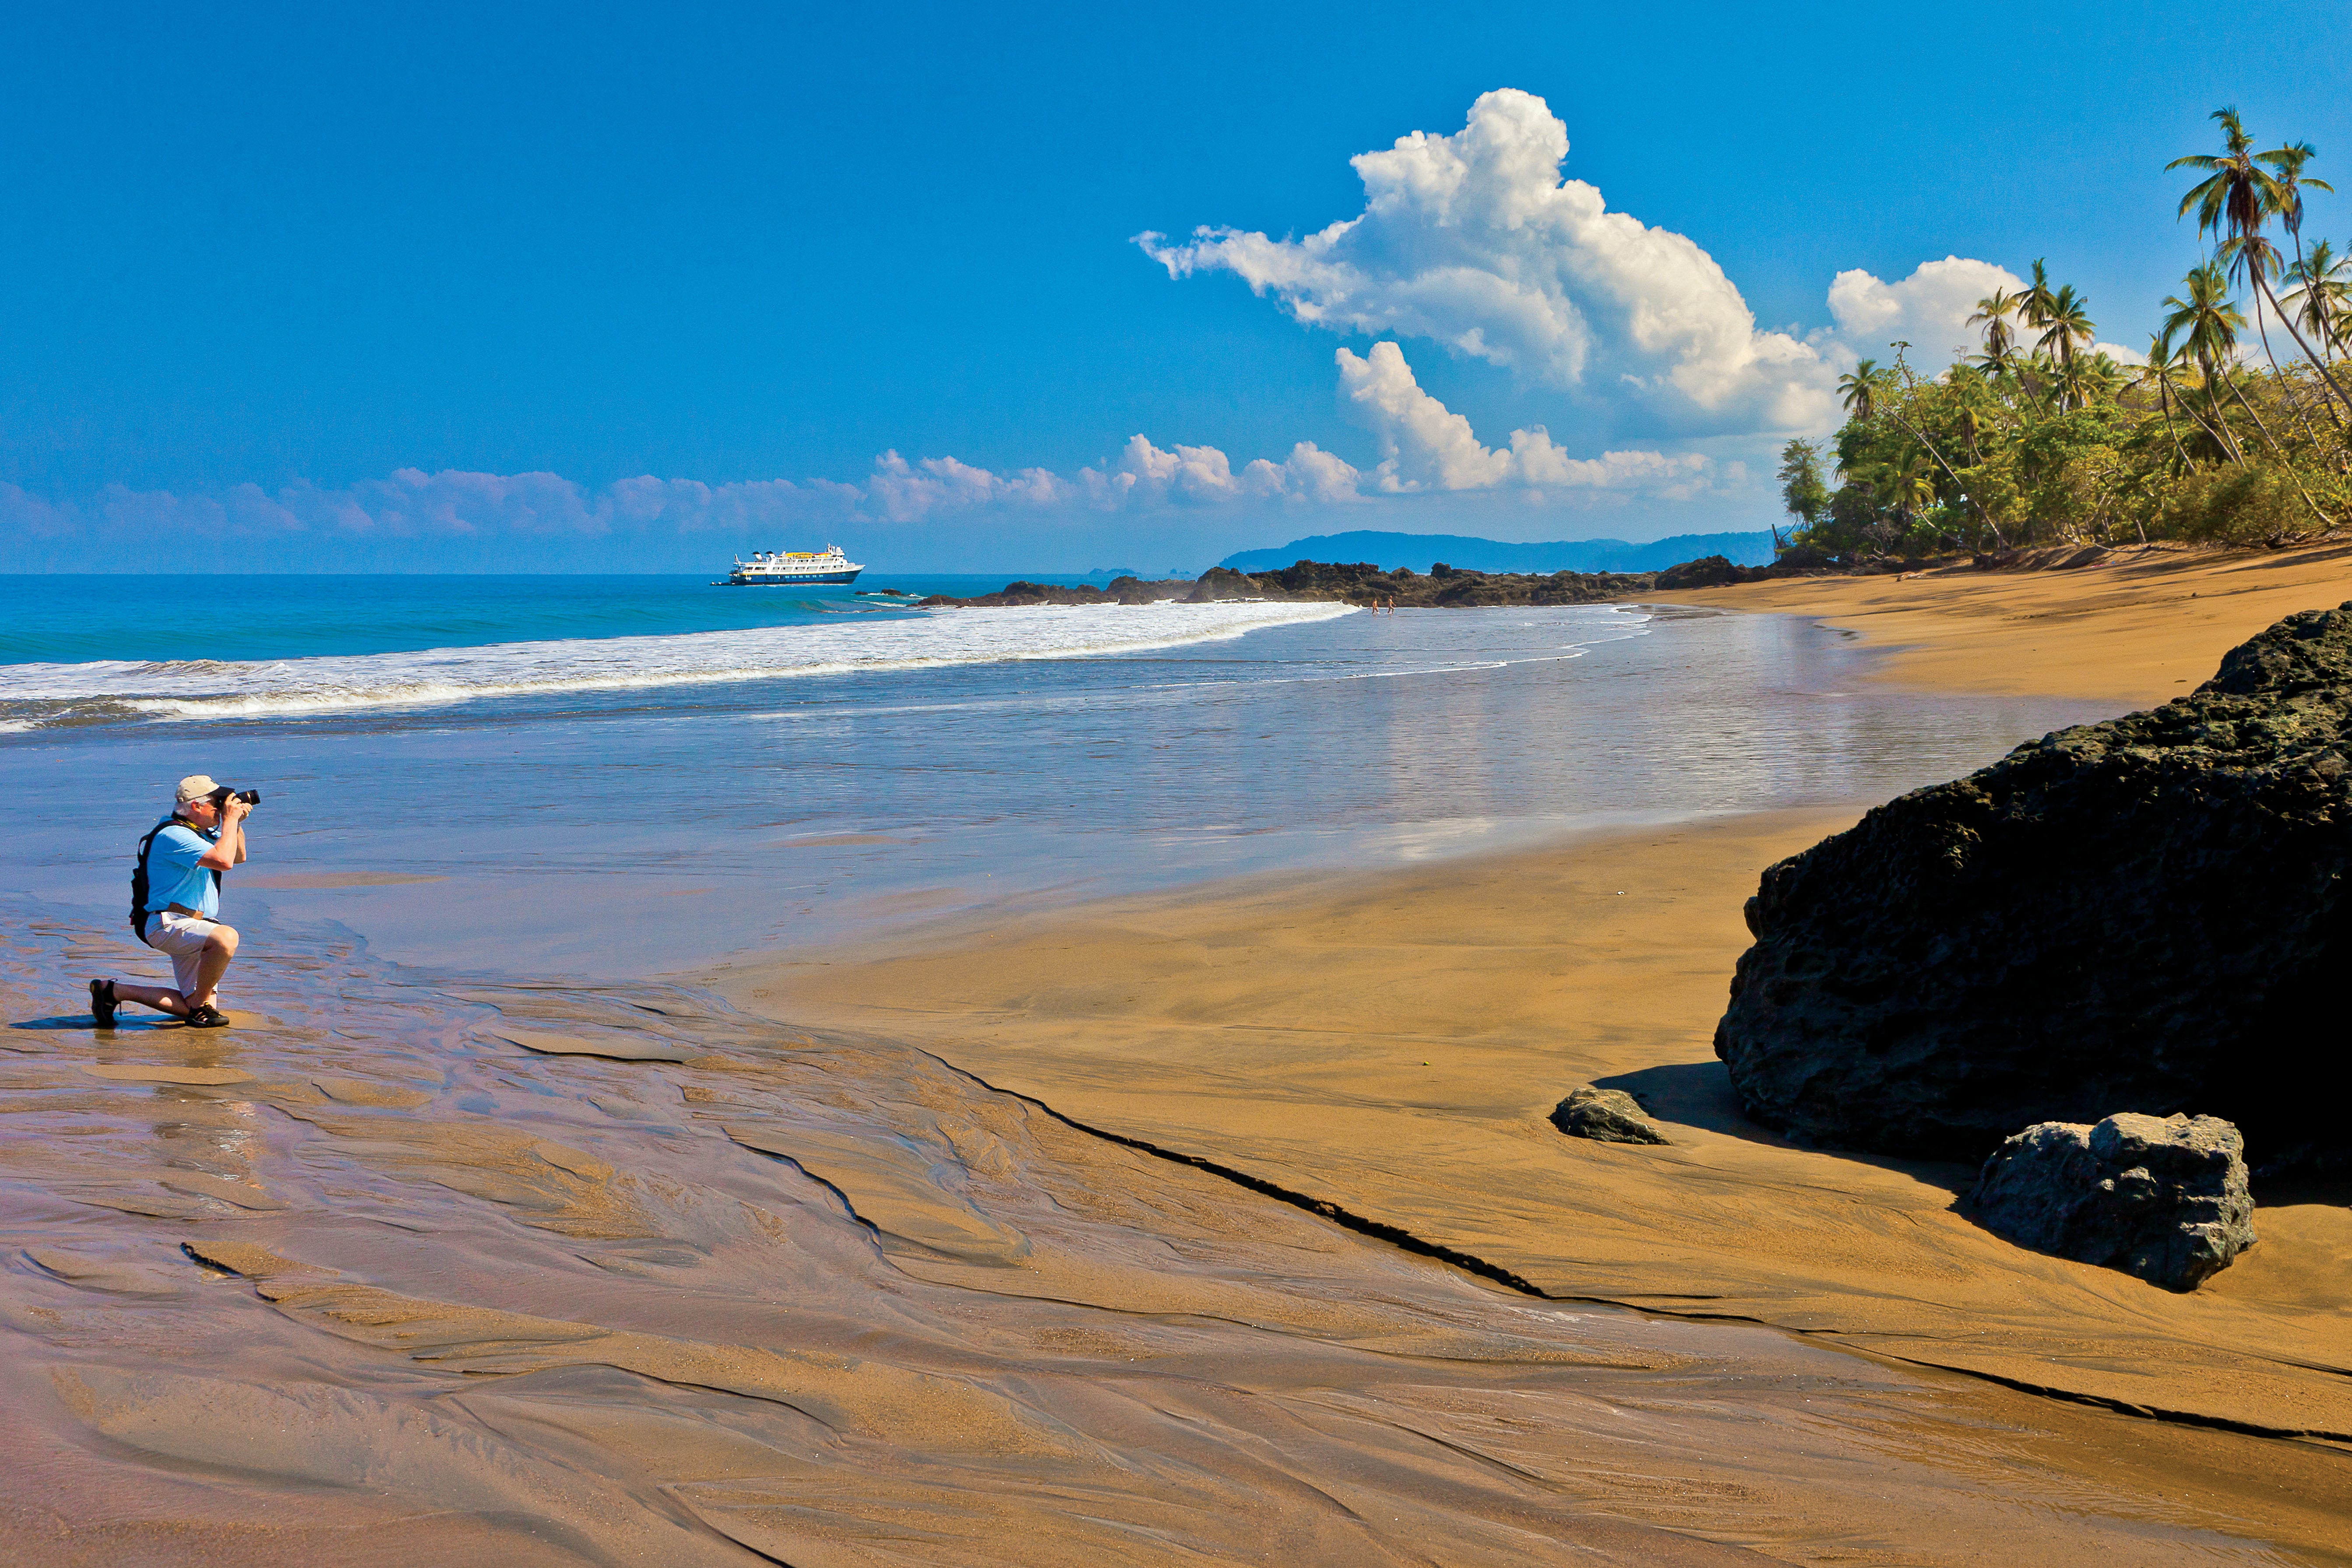 Beach landscape with sand, water, rocks, and trees